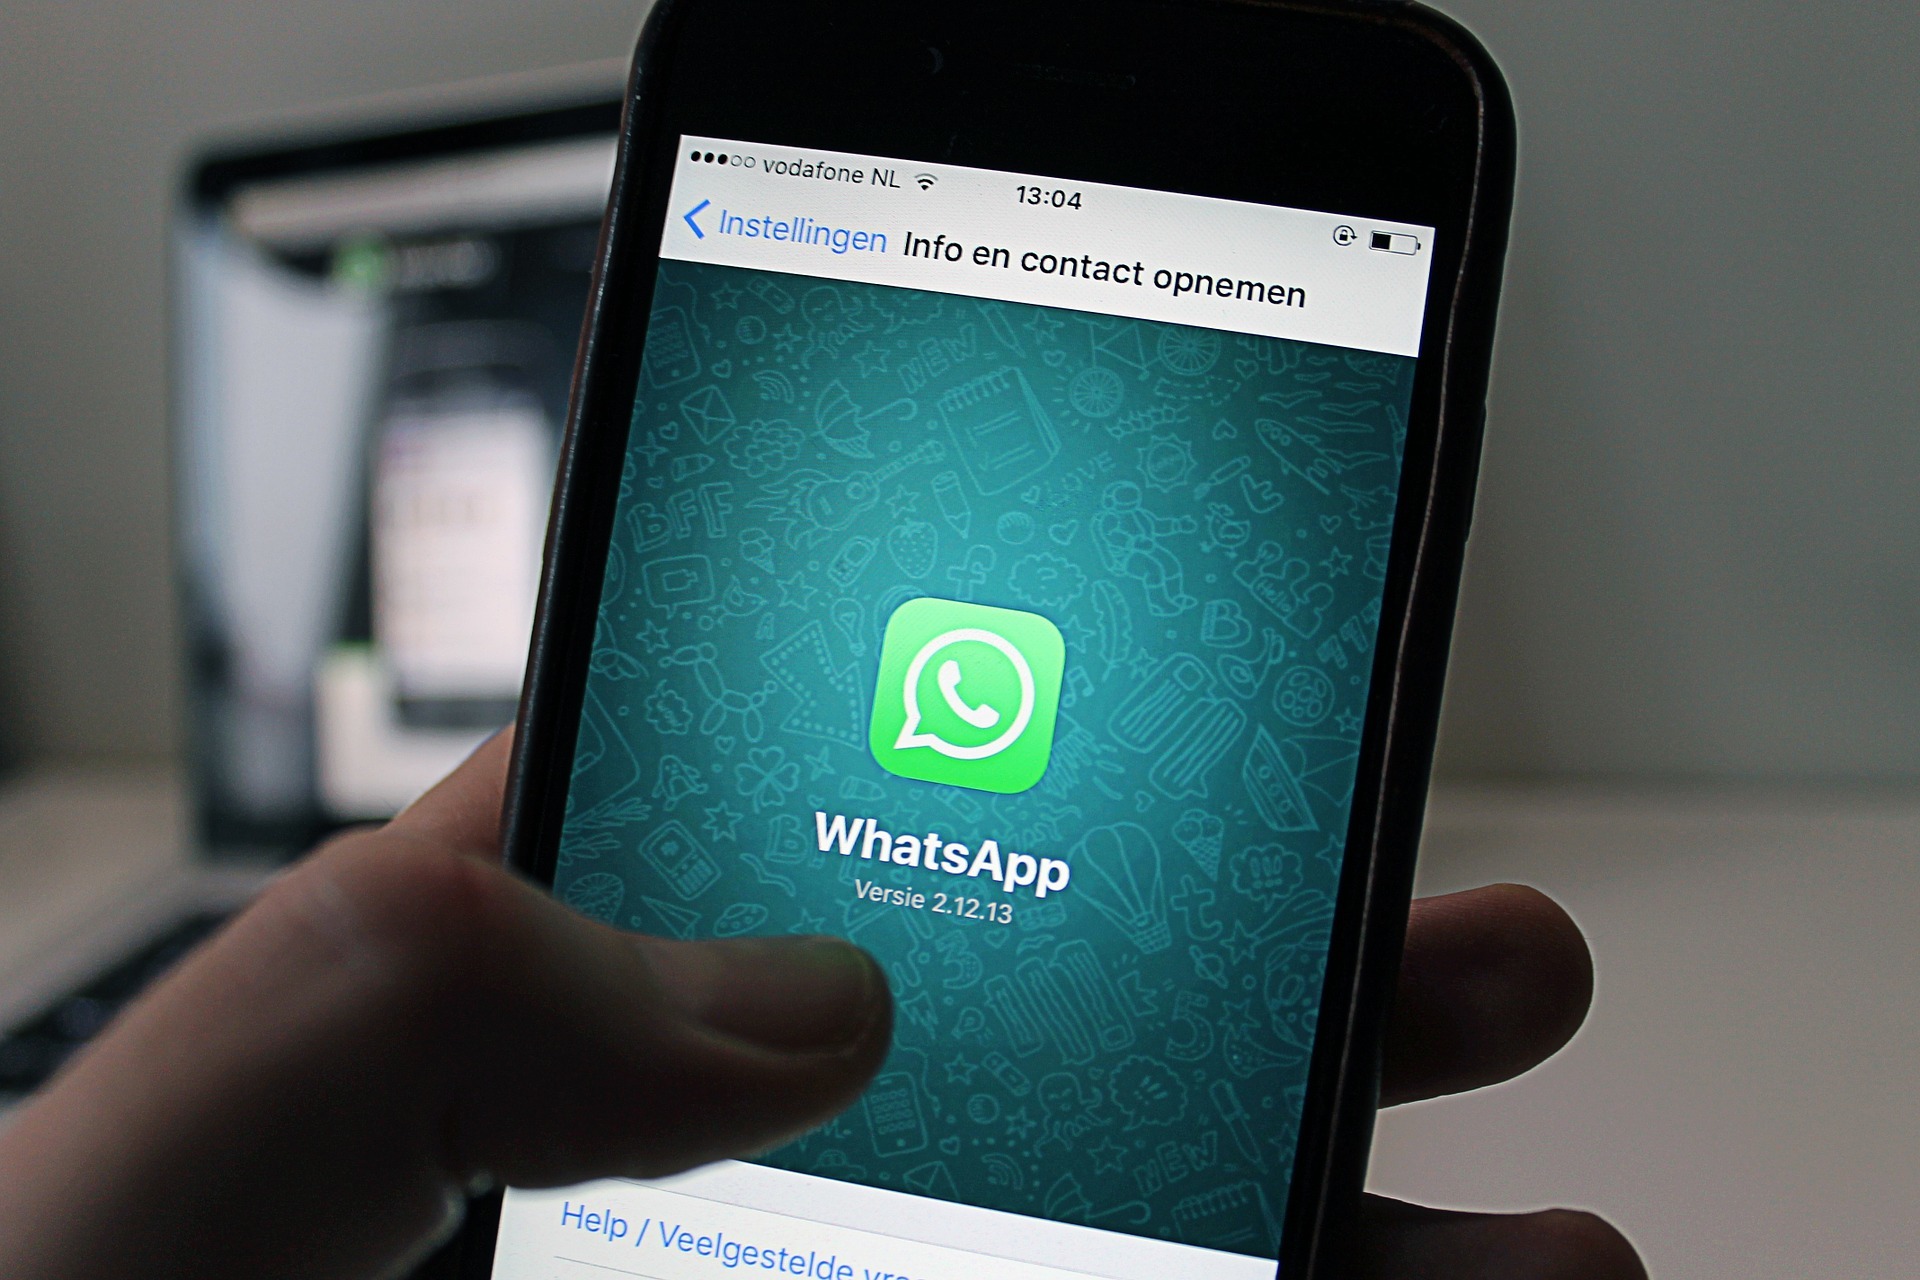 WhatsApp releases new privacy features